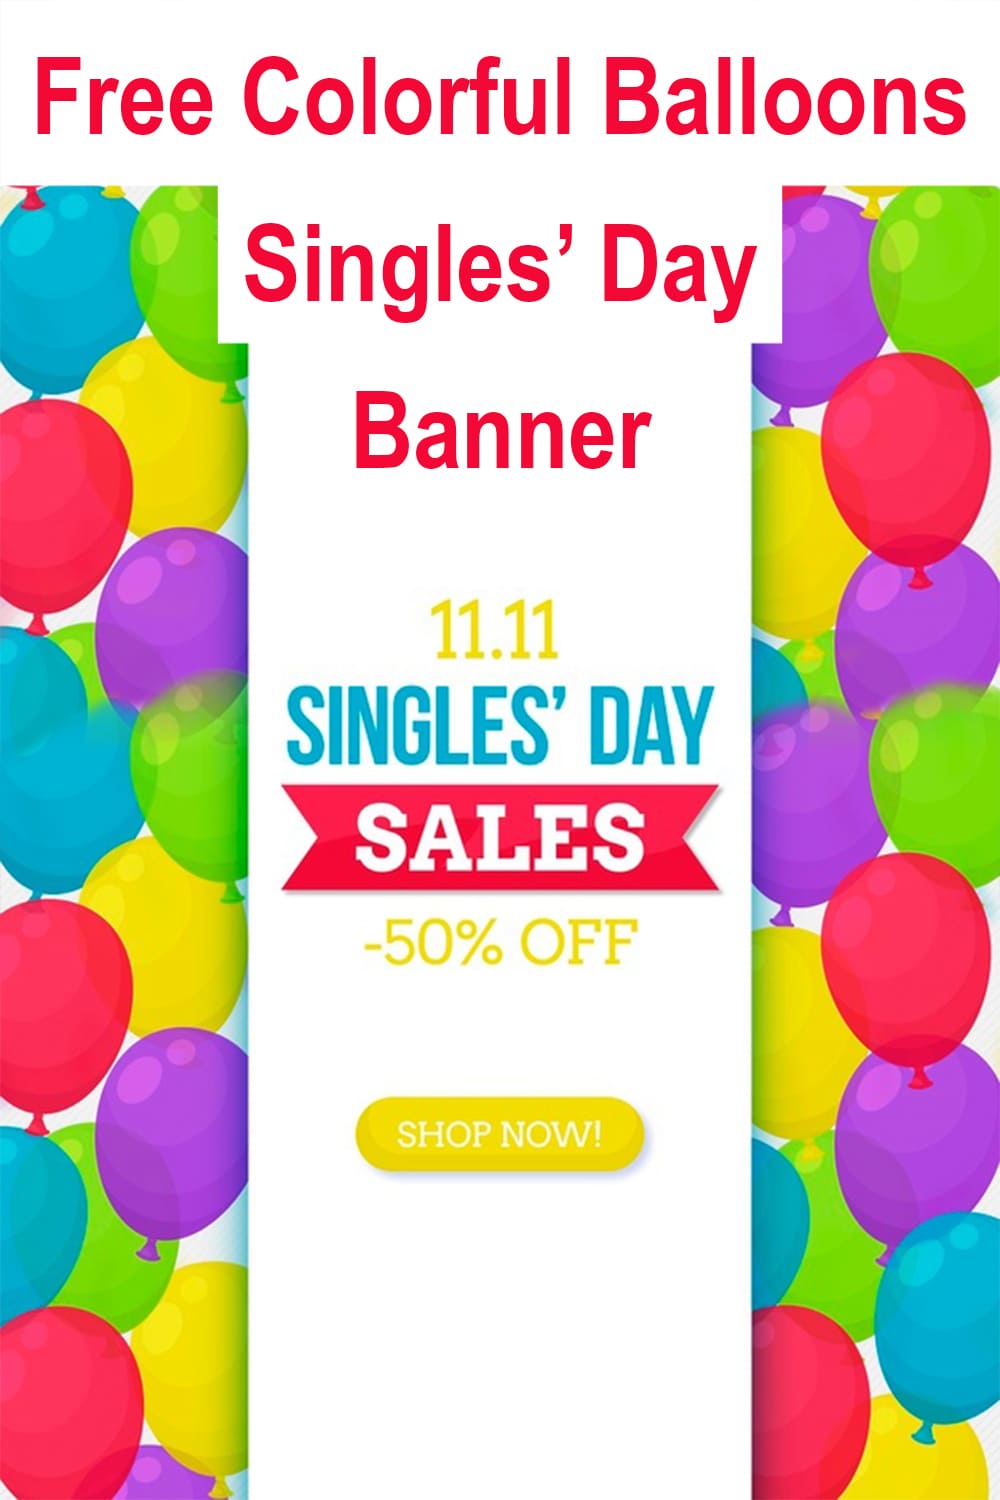 Free Colorful Balloons Singles' Day Banner Pinterest.